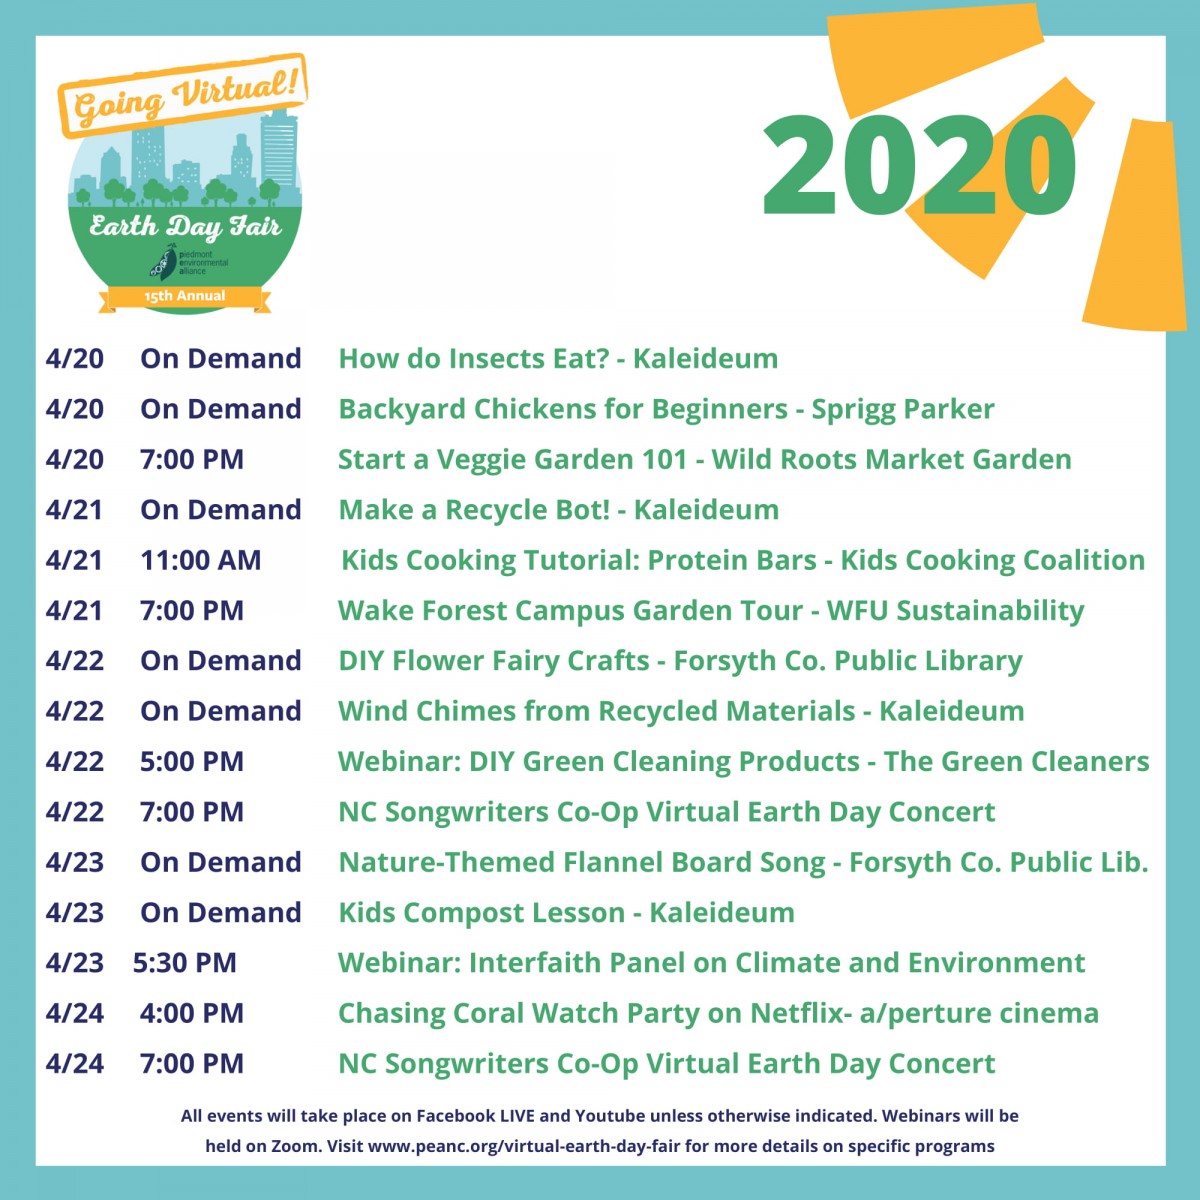 Piedmont Earth Day Fair 2020 events lineup